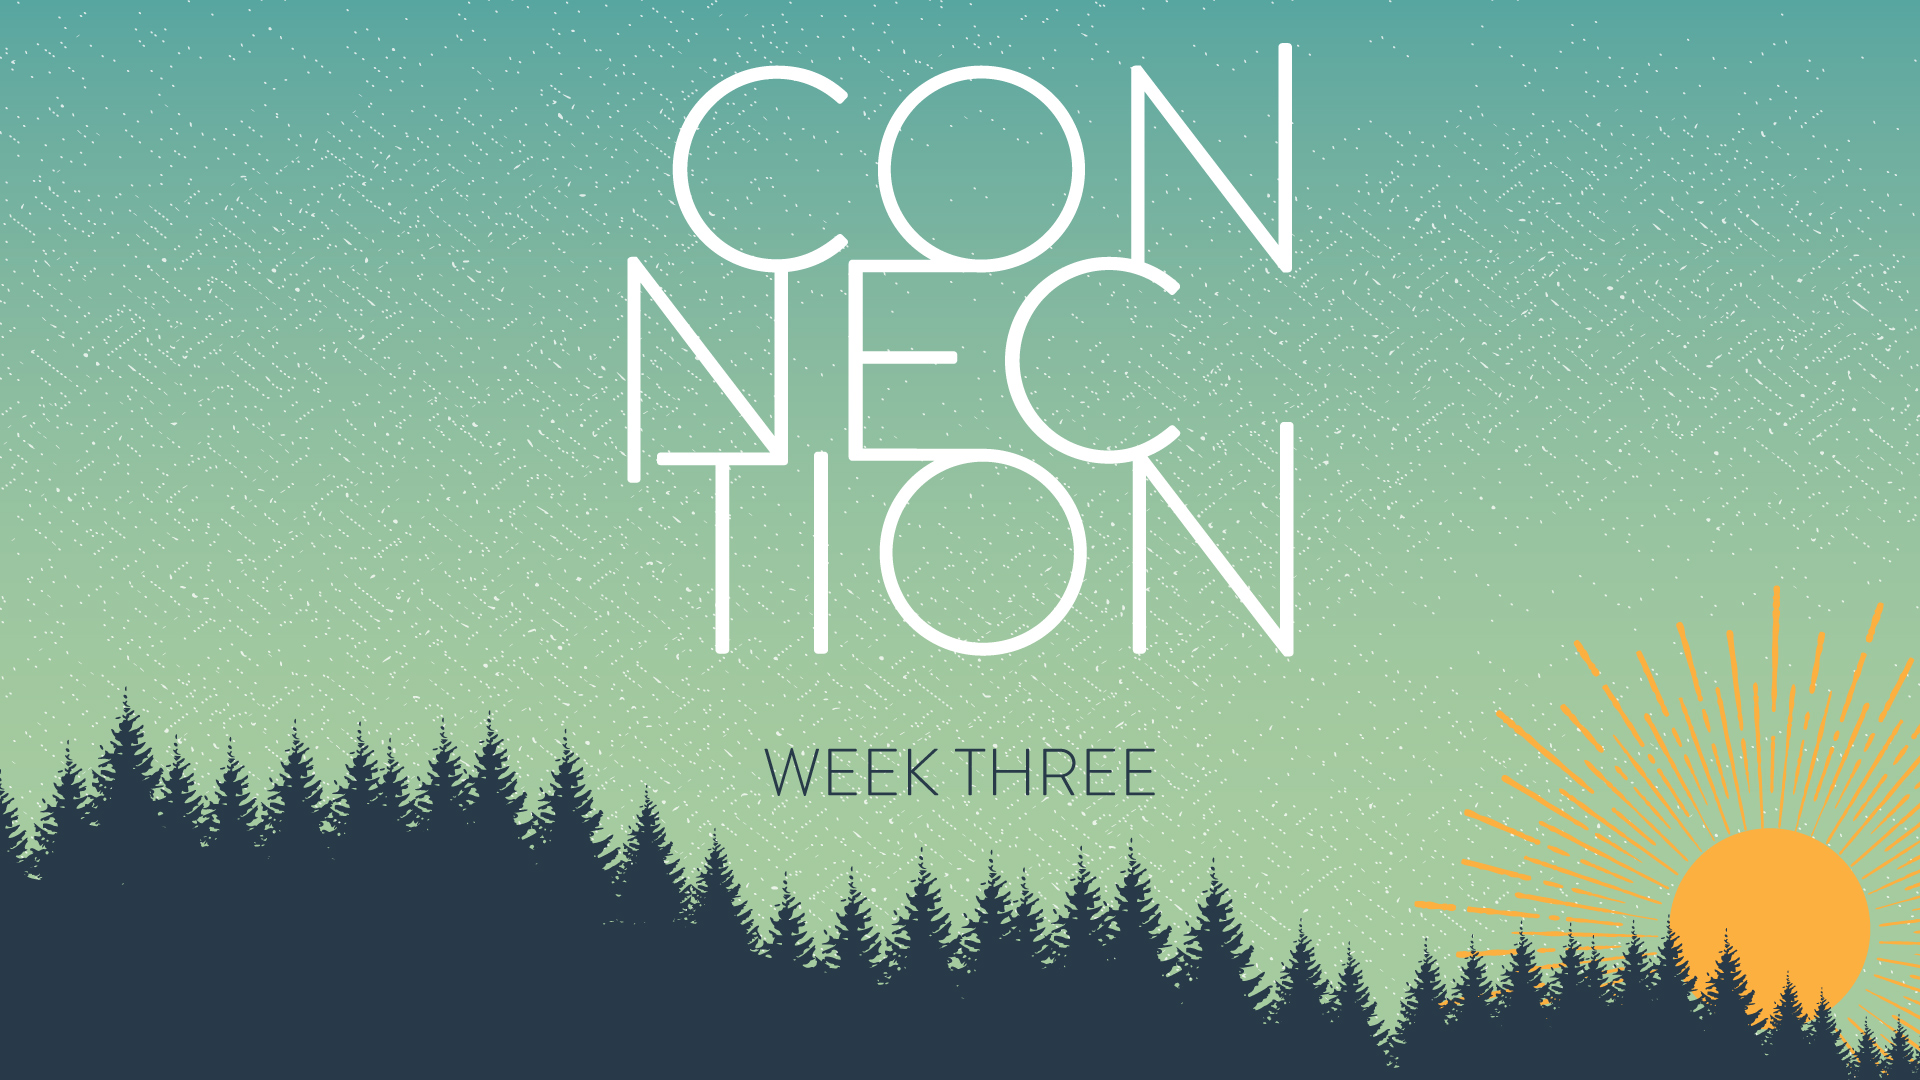 Connection - Week Three